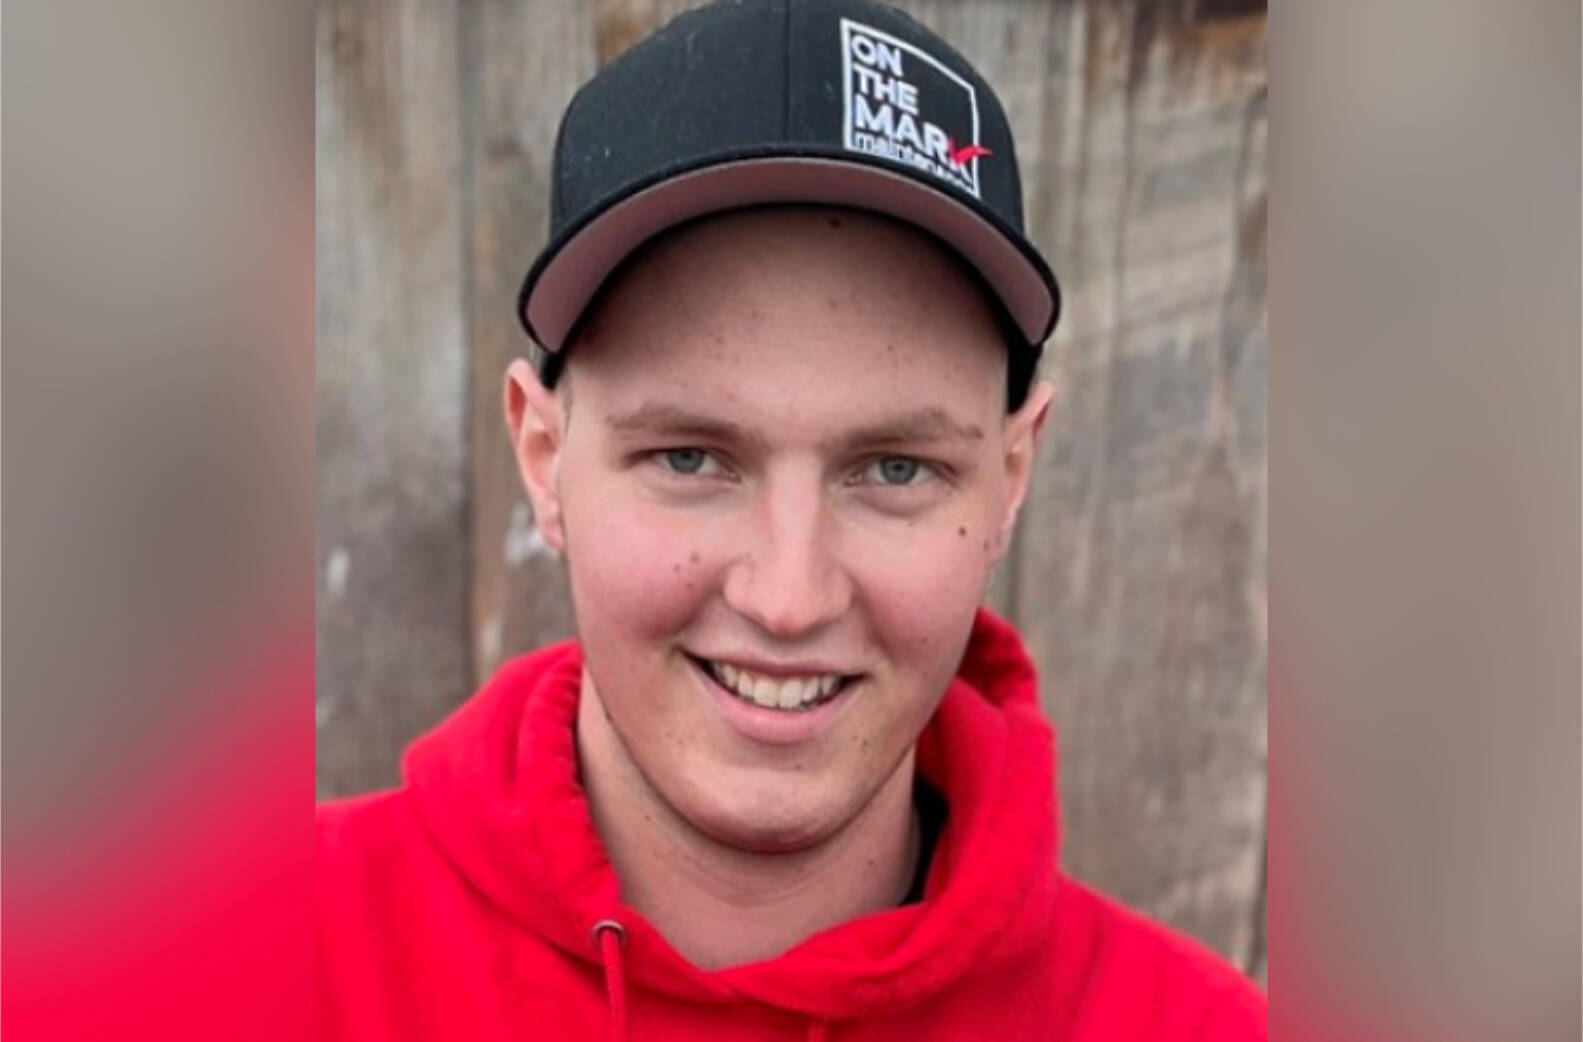 Markus Schouten died in May 2022 from bone cancer. His dad, Mike Schouten, said Markus would be proud to know his friends are playing roller hockey in his memory to raise money and awareness for Canuck Place Children’s Hospice.